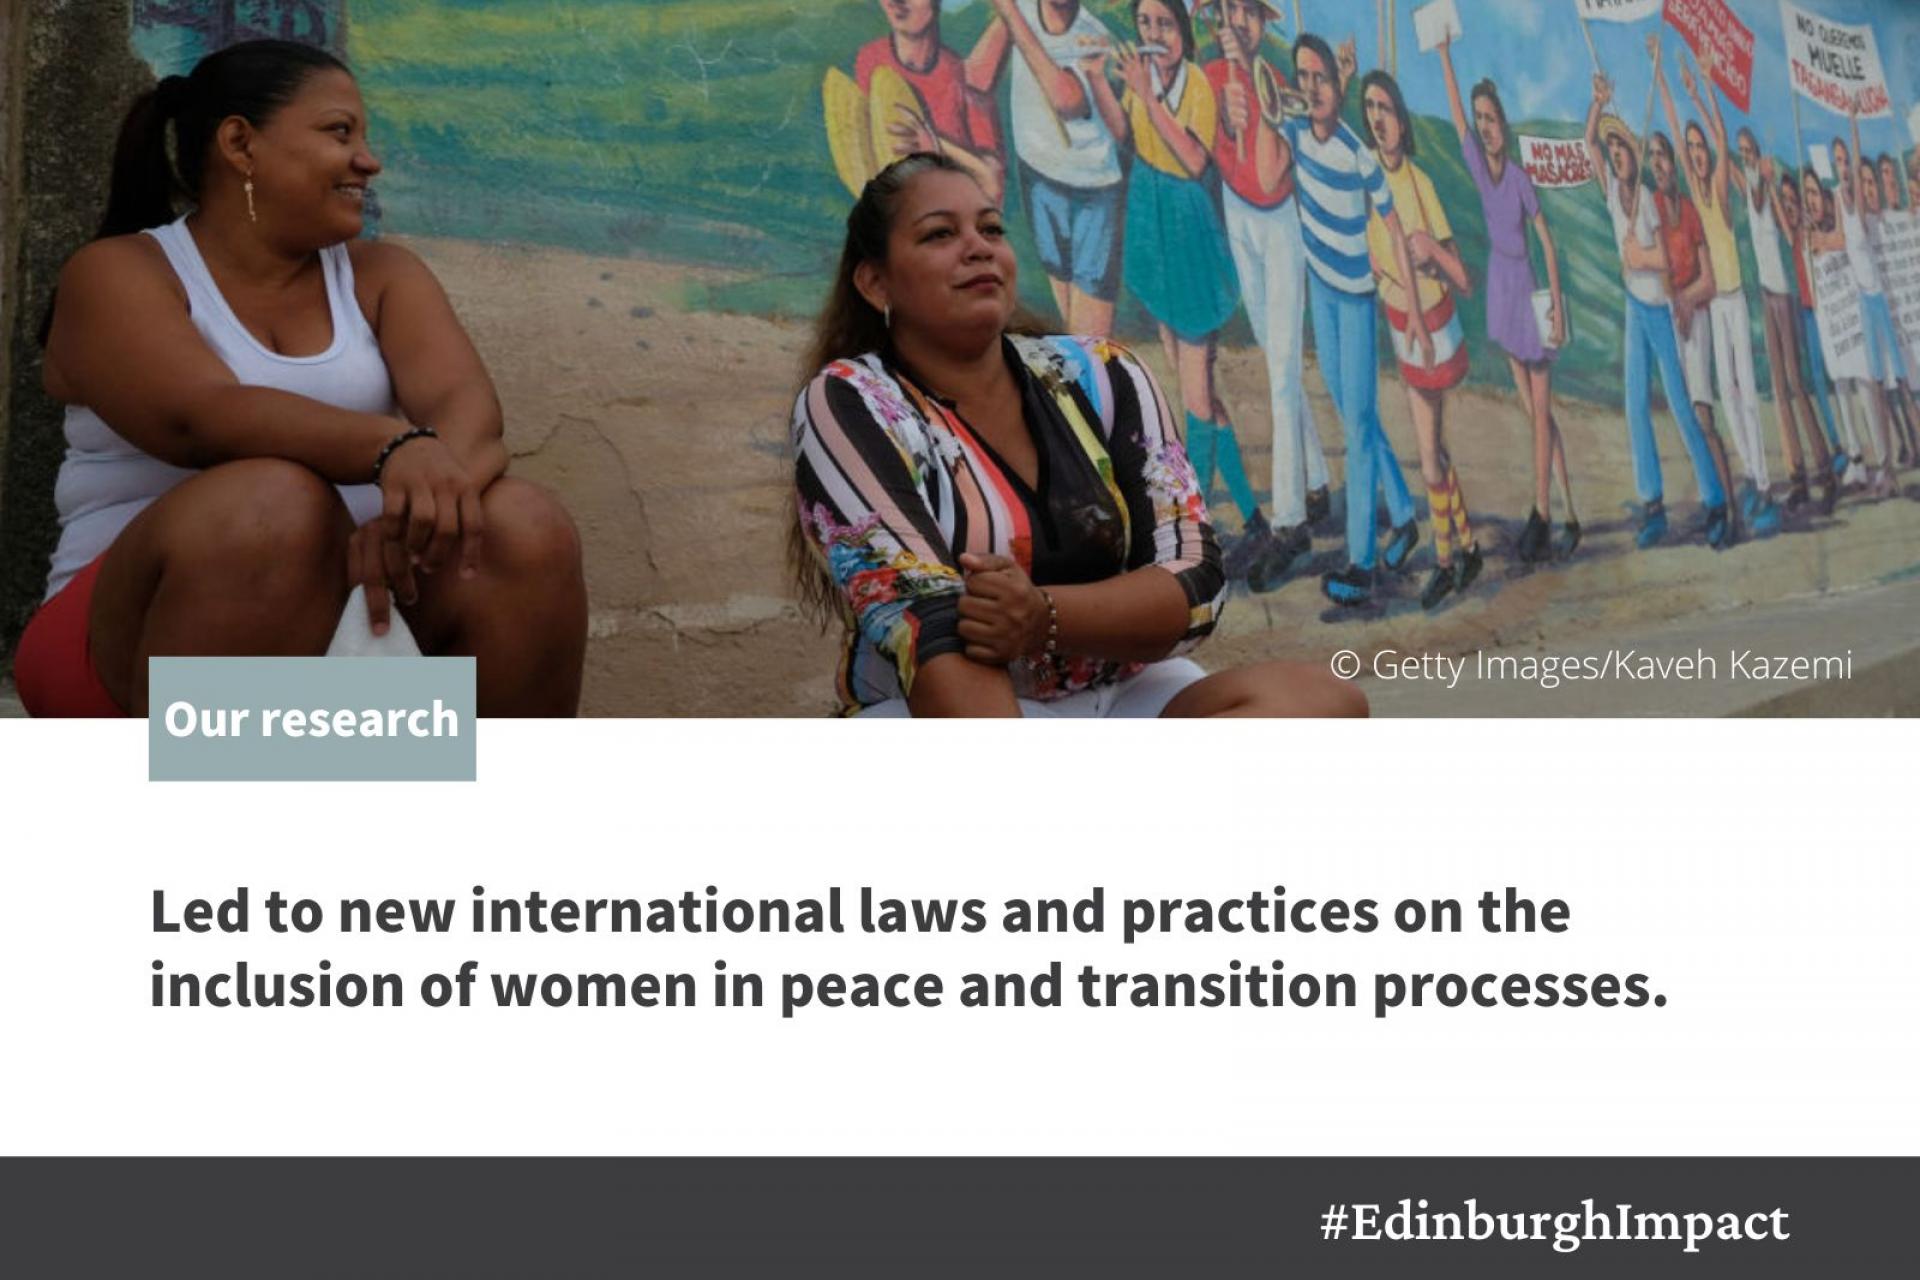 Our research led to new international laws and practices on the inclusion of women in peace and transition processes. 